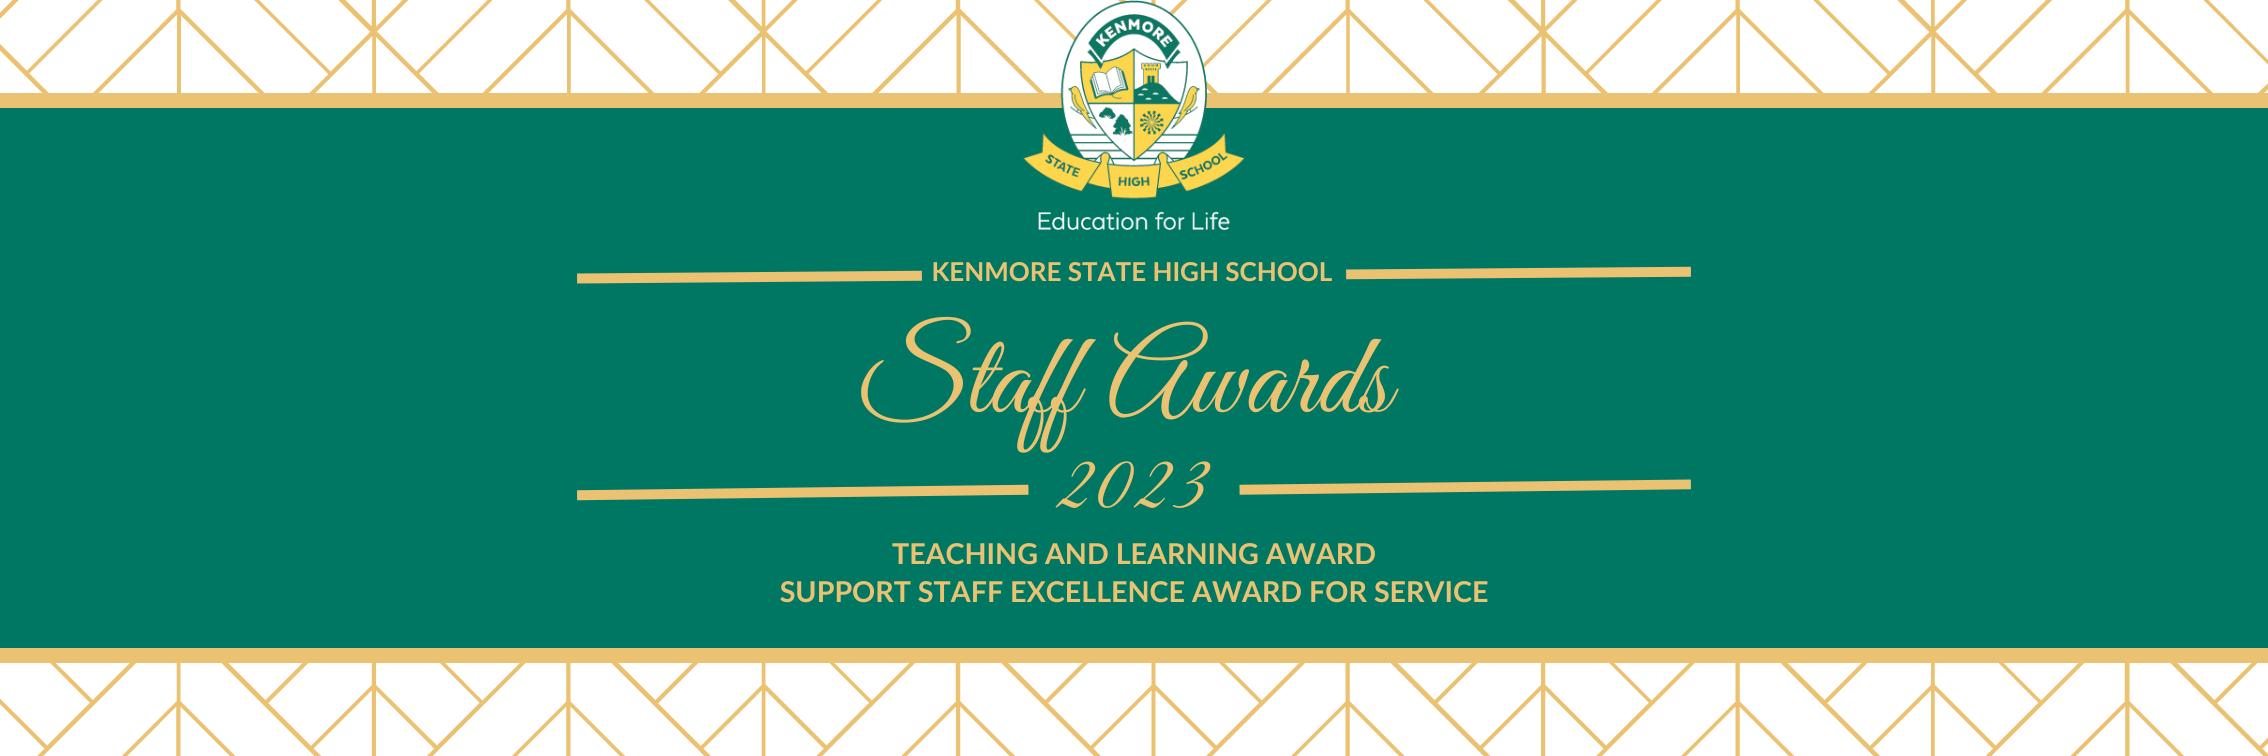 Website Banners - Staff Awards.png